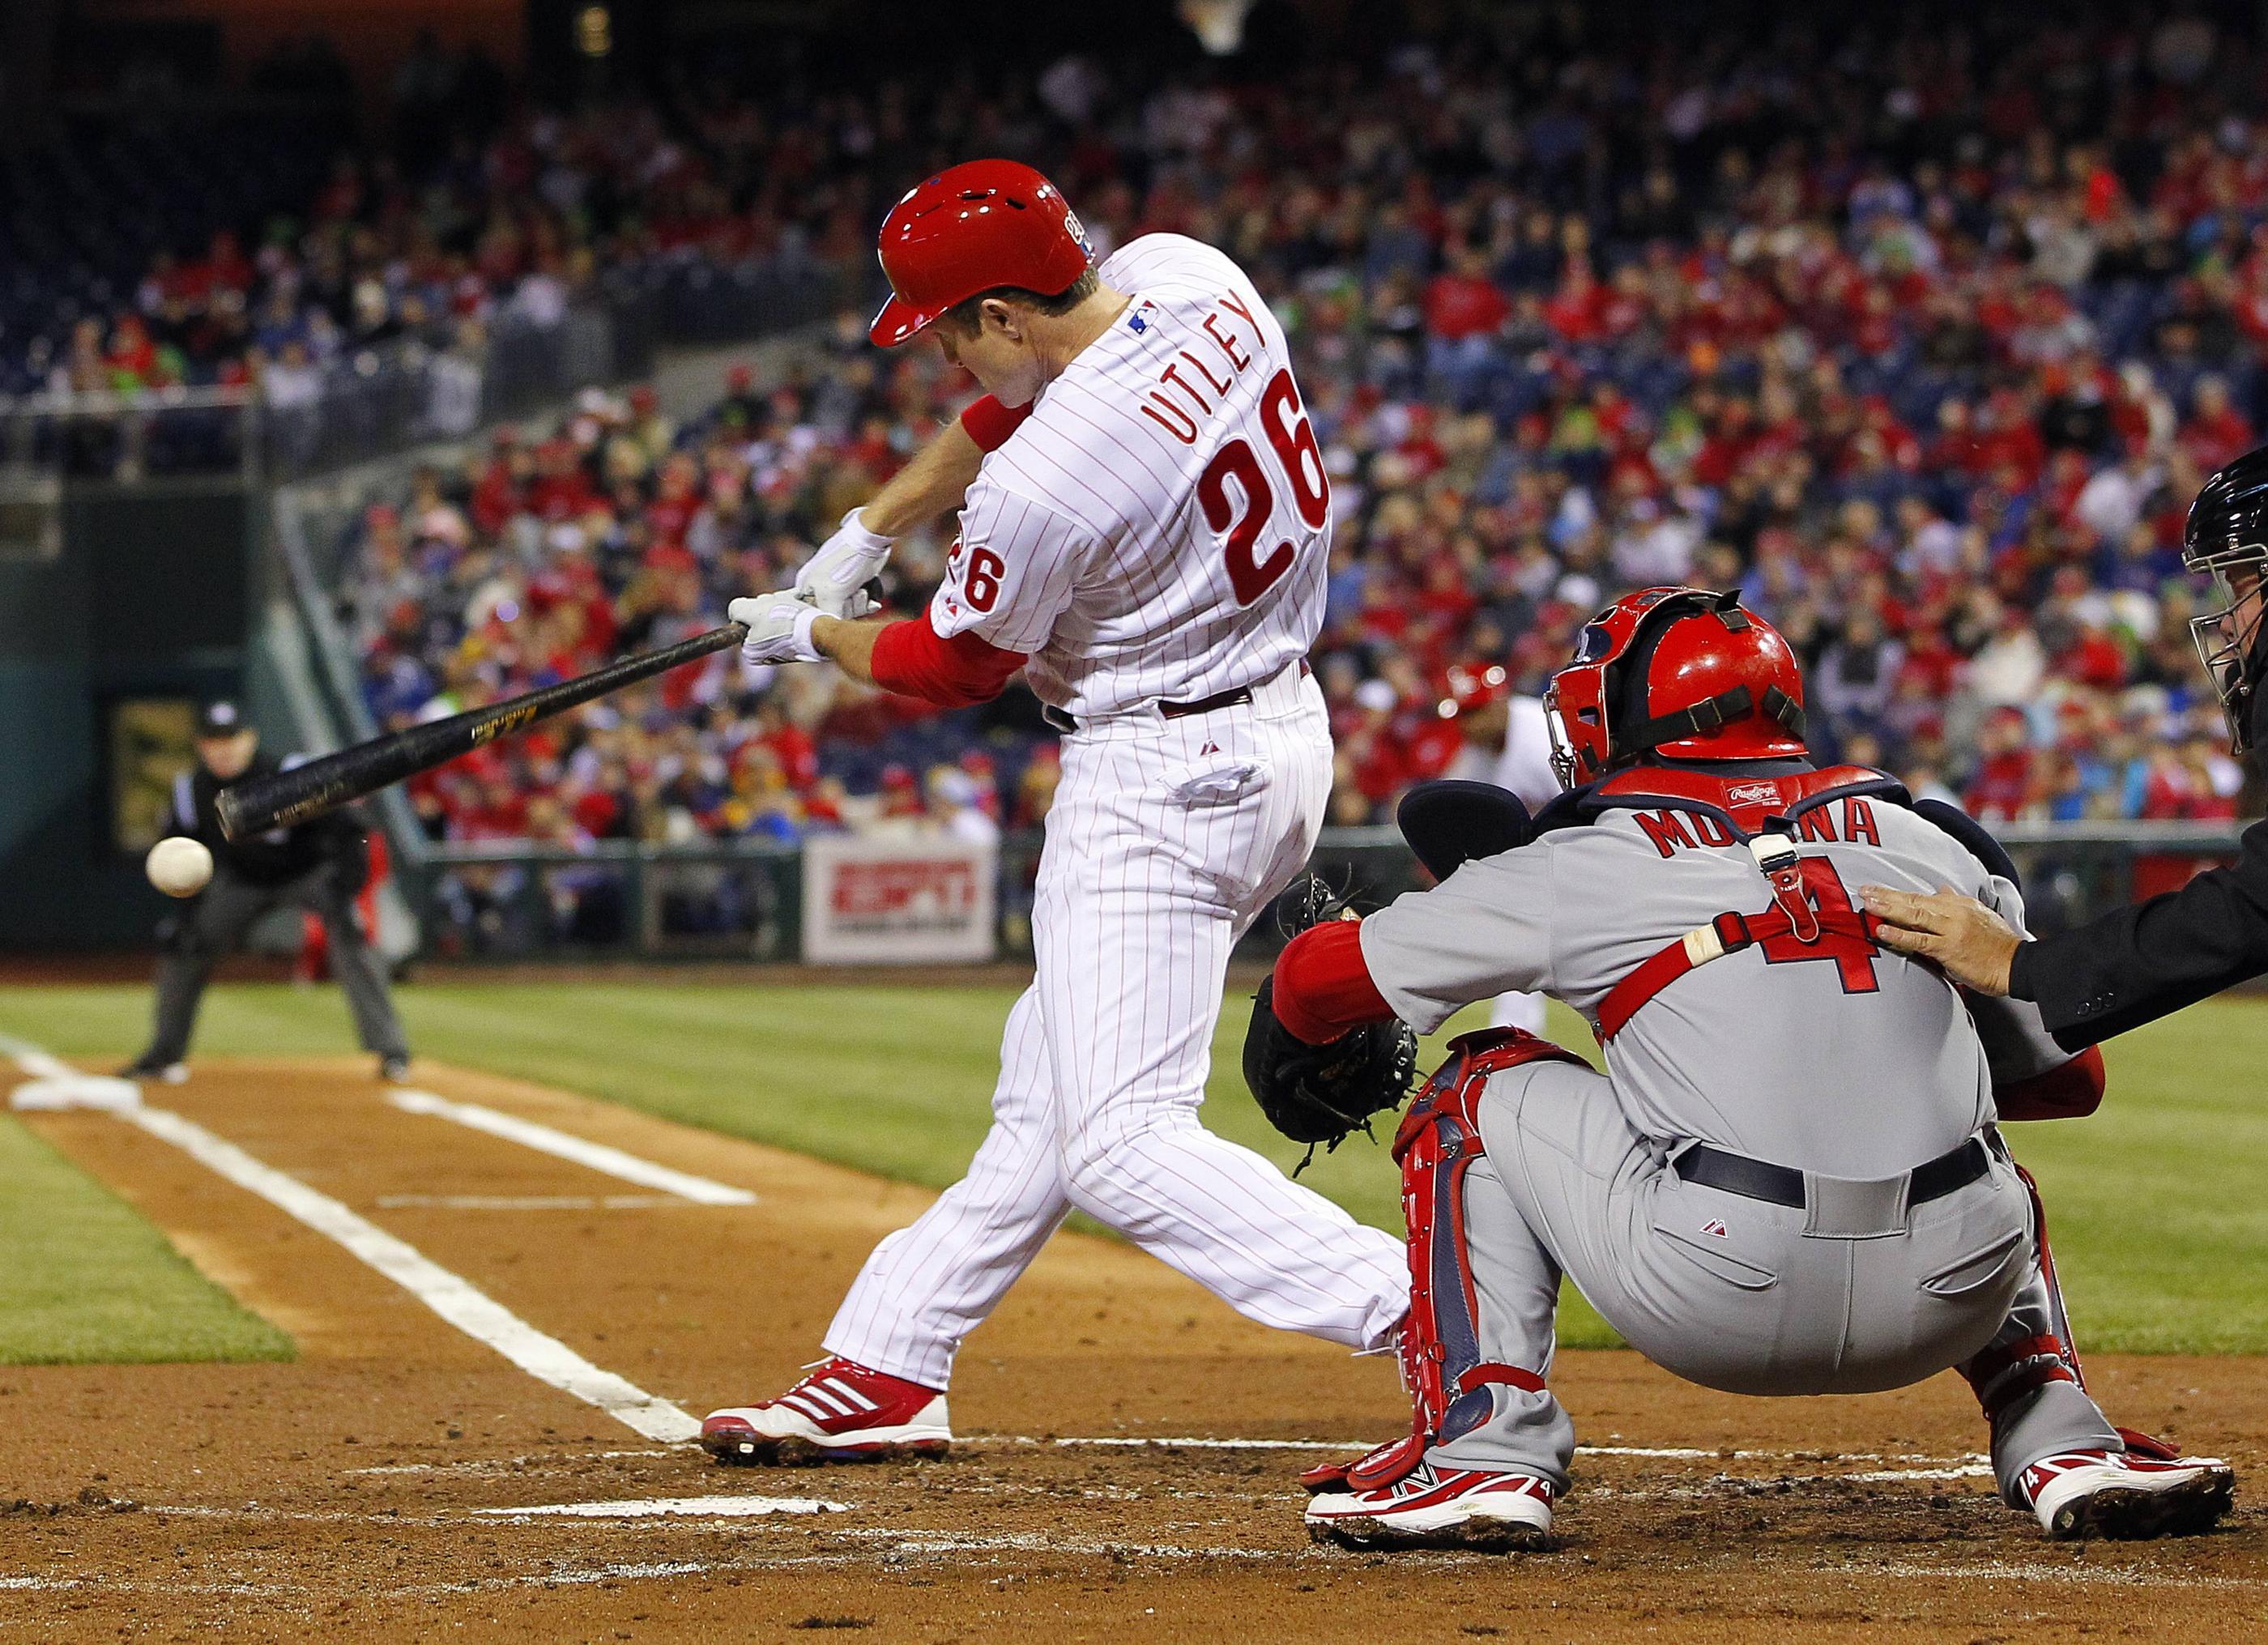 Chase Utley of the Phillies MLB photo. High Quality Wallpaper